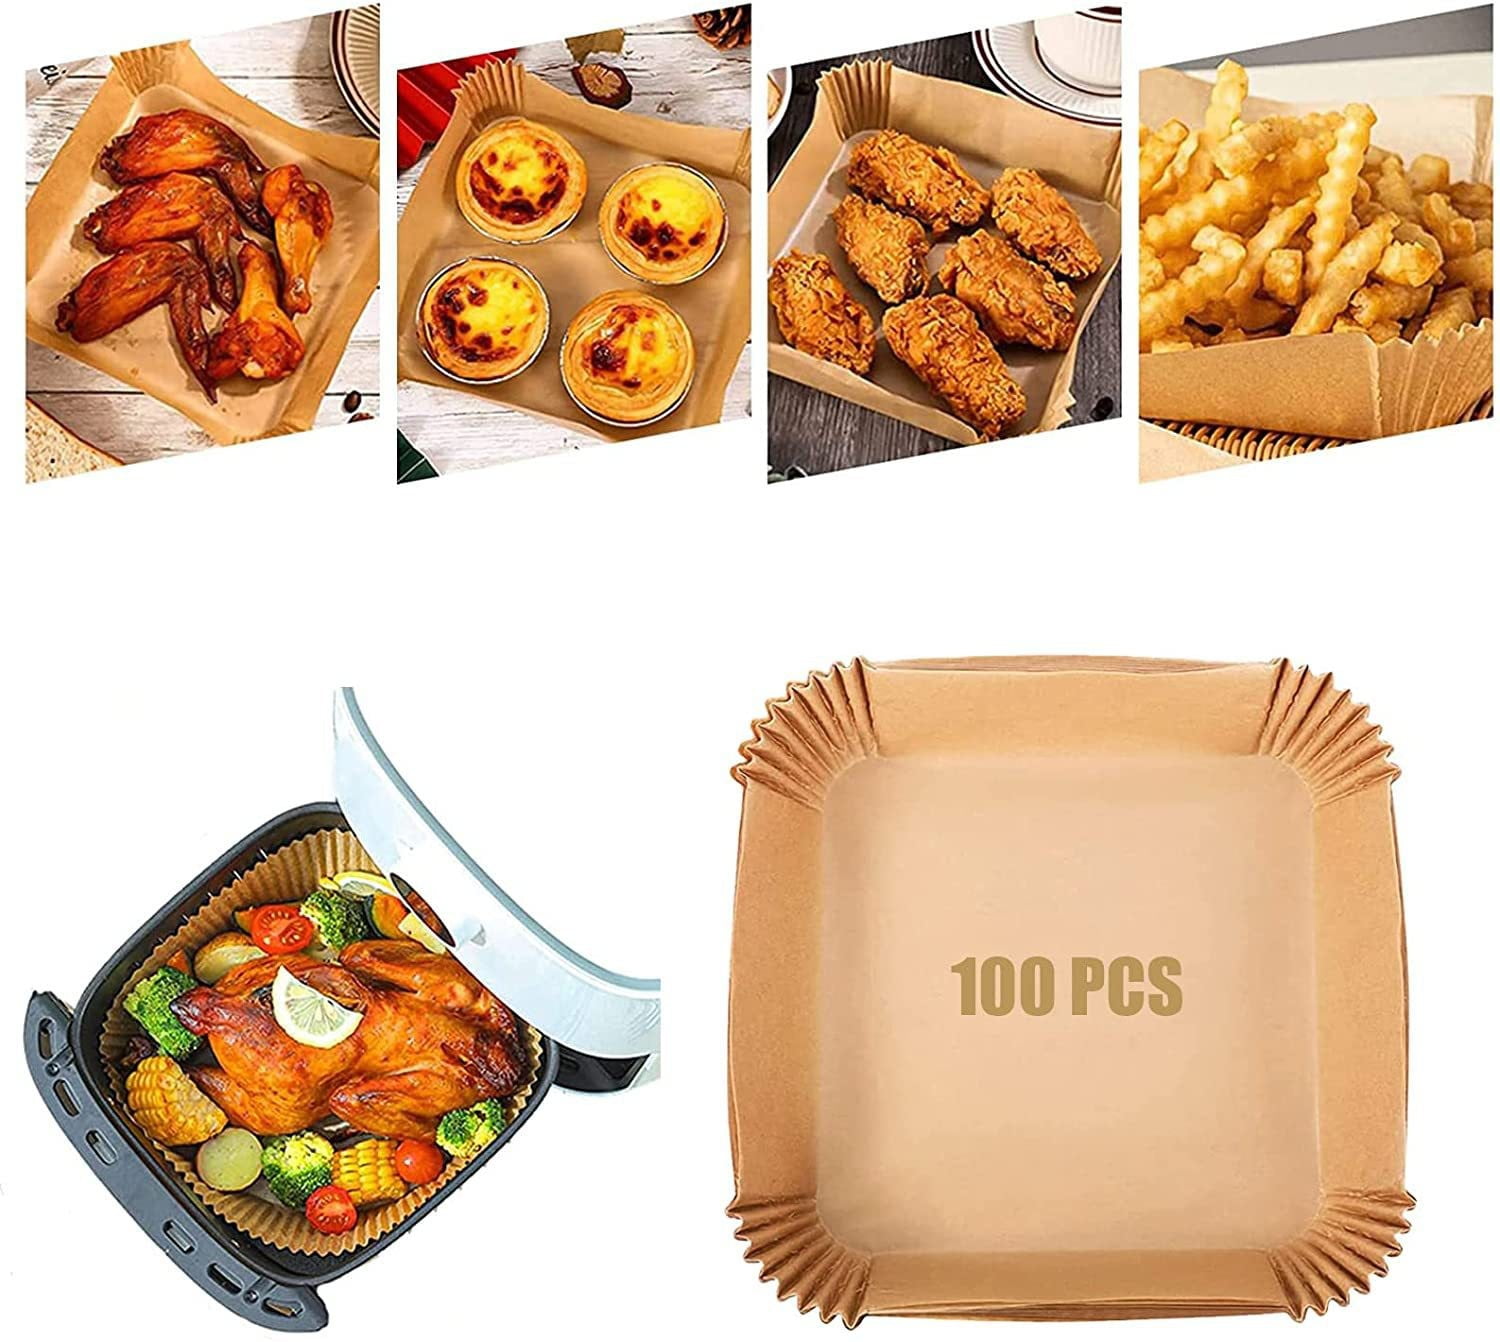 Air Fryer Paper Liners,100Pcs Parchment Paper, Air Fryer Disposable Paper  Liner for Microwave, Non-Stick Air Fryer Liners Square Free of Bleach for 6-8  QT Air Fryer Baking Roasting Microwave (6IN)